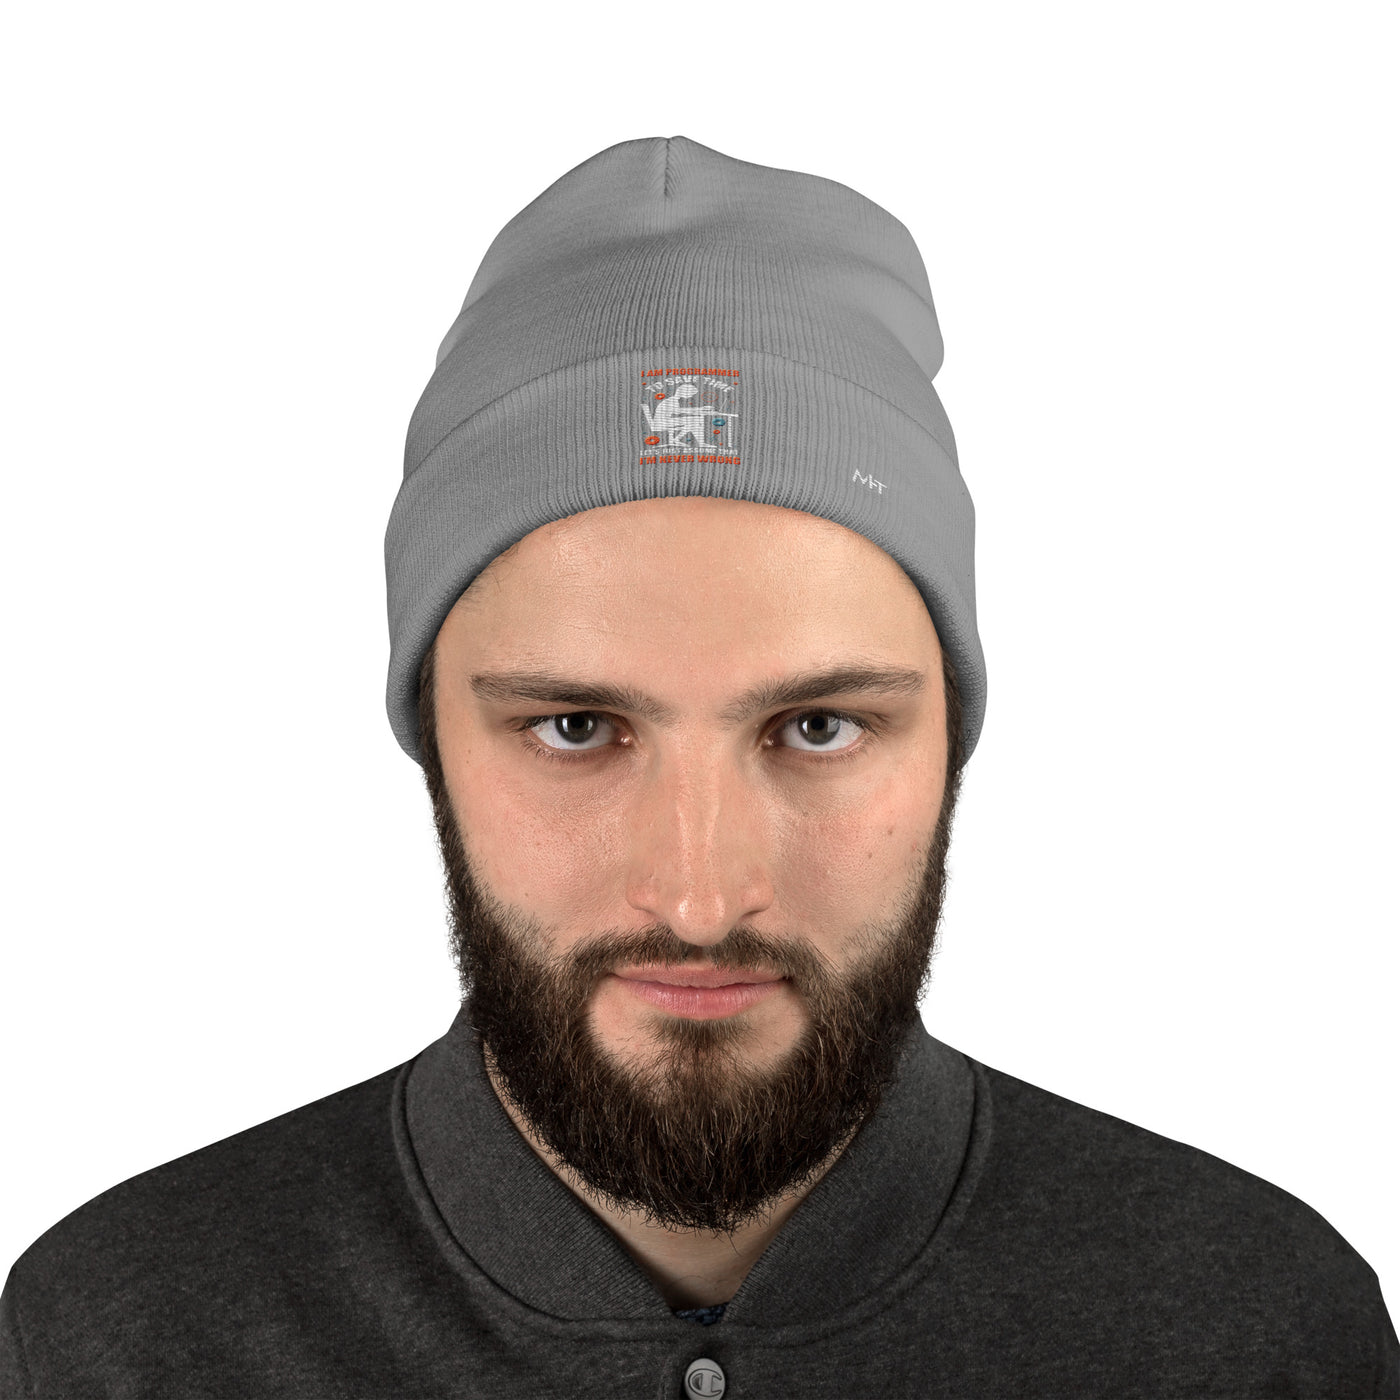 I am Programmer, to Save time, let's just Assume; I am never Wrong - Embroidered Beanie